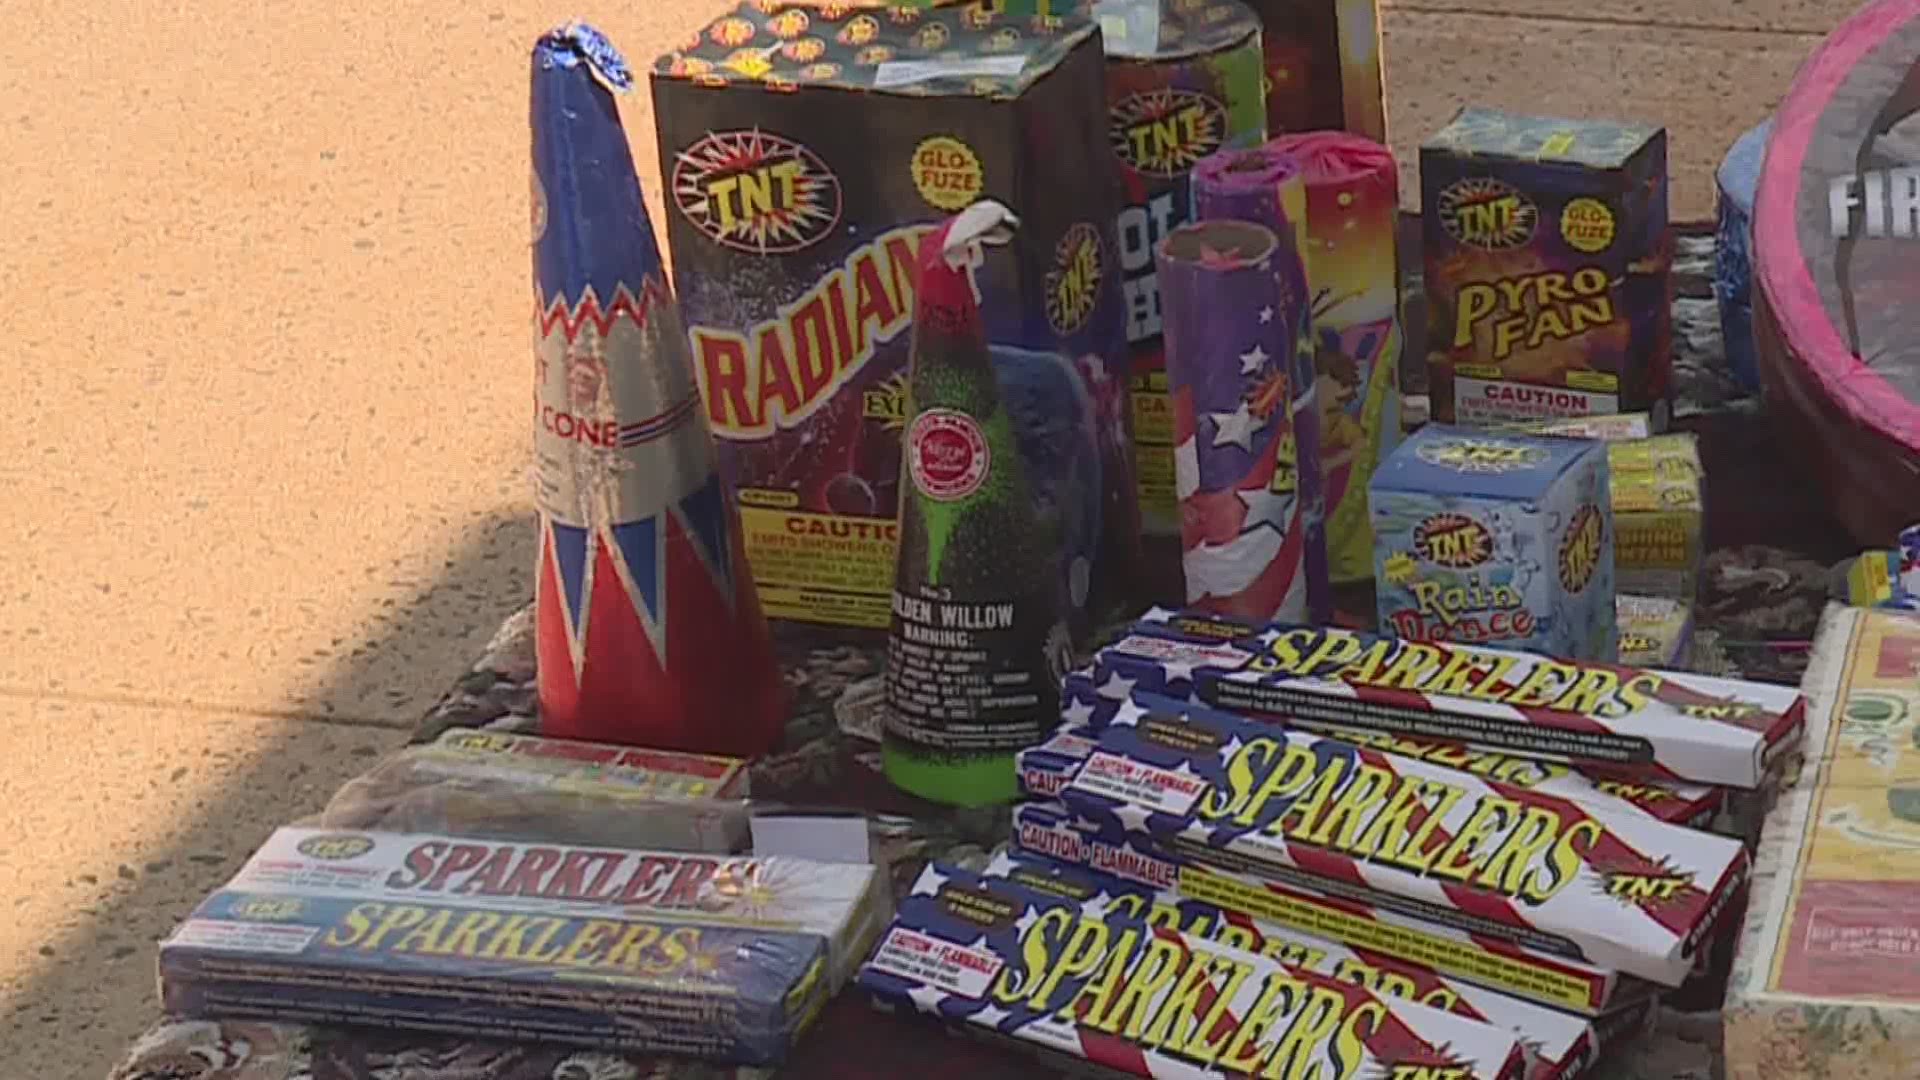 A doctor also joined State Police to discuss some of the serious injuries that can happen if fireworks are not used properly.